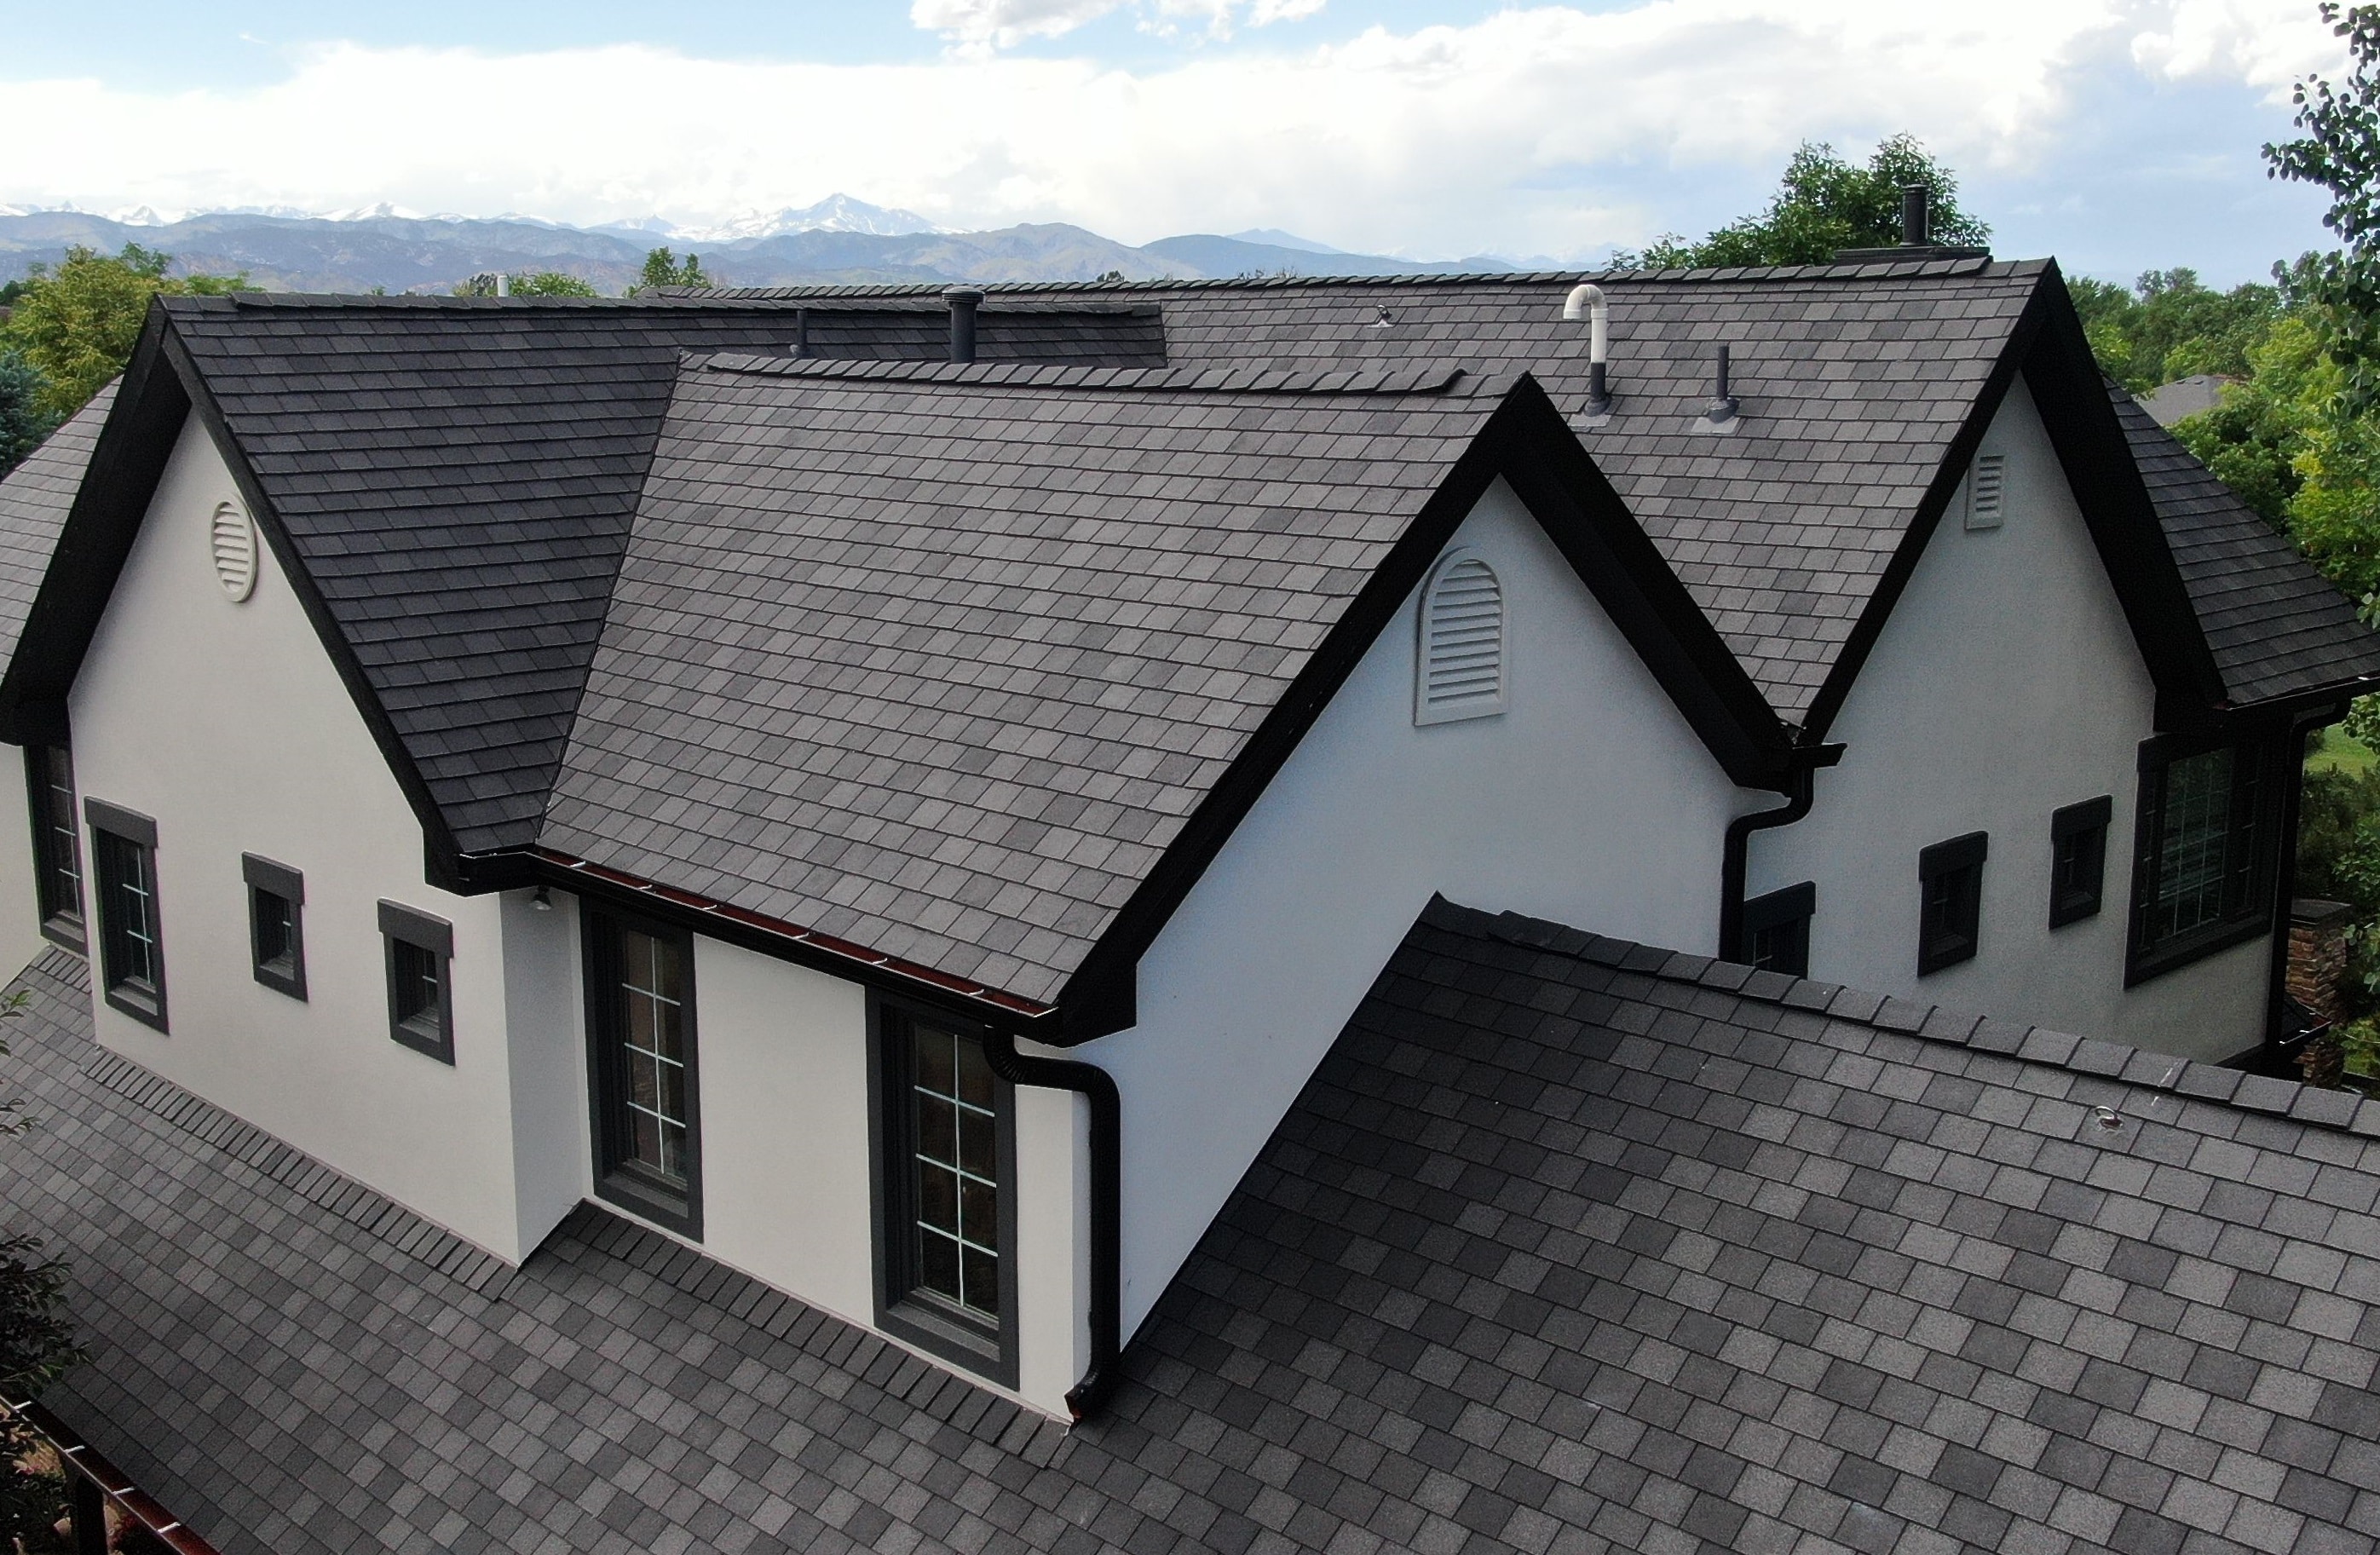 Synthetic Slate Roofing A Better, Alternatives To Natural Slate Roof Tiles